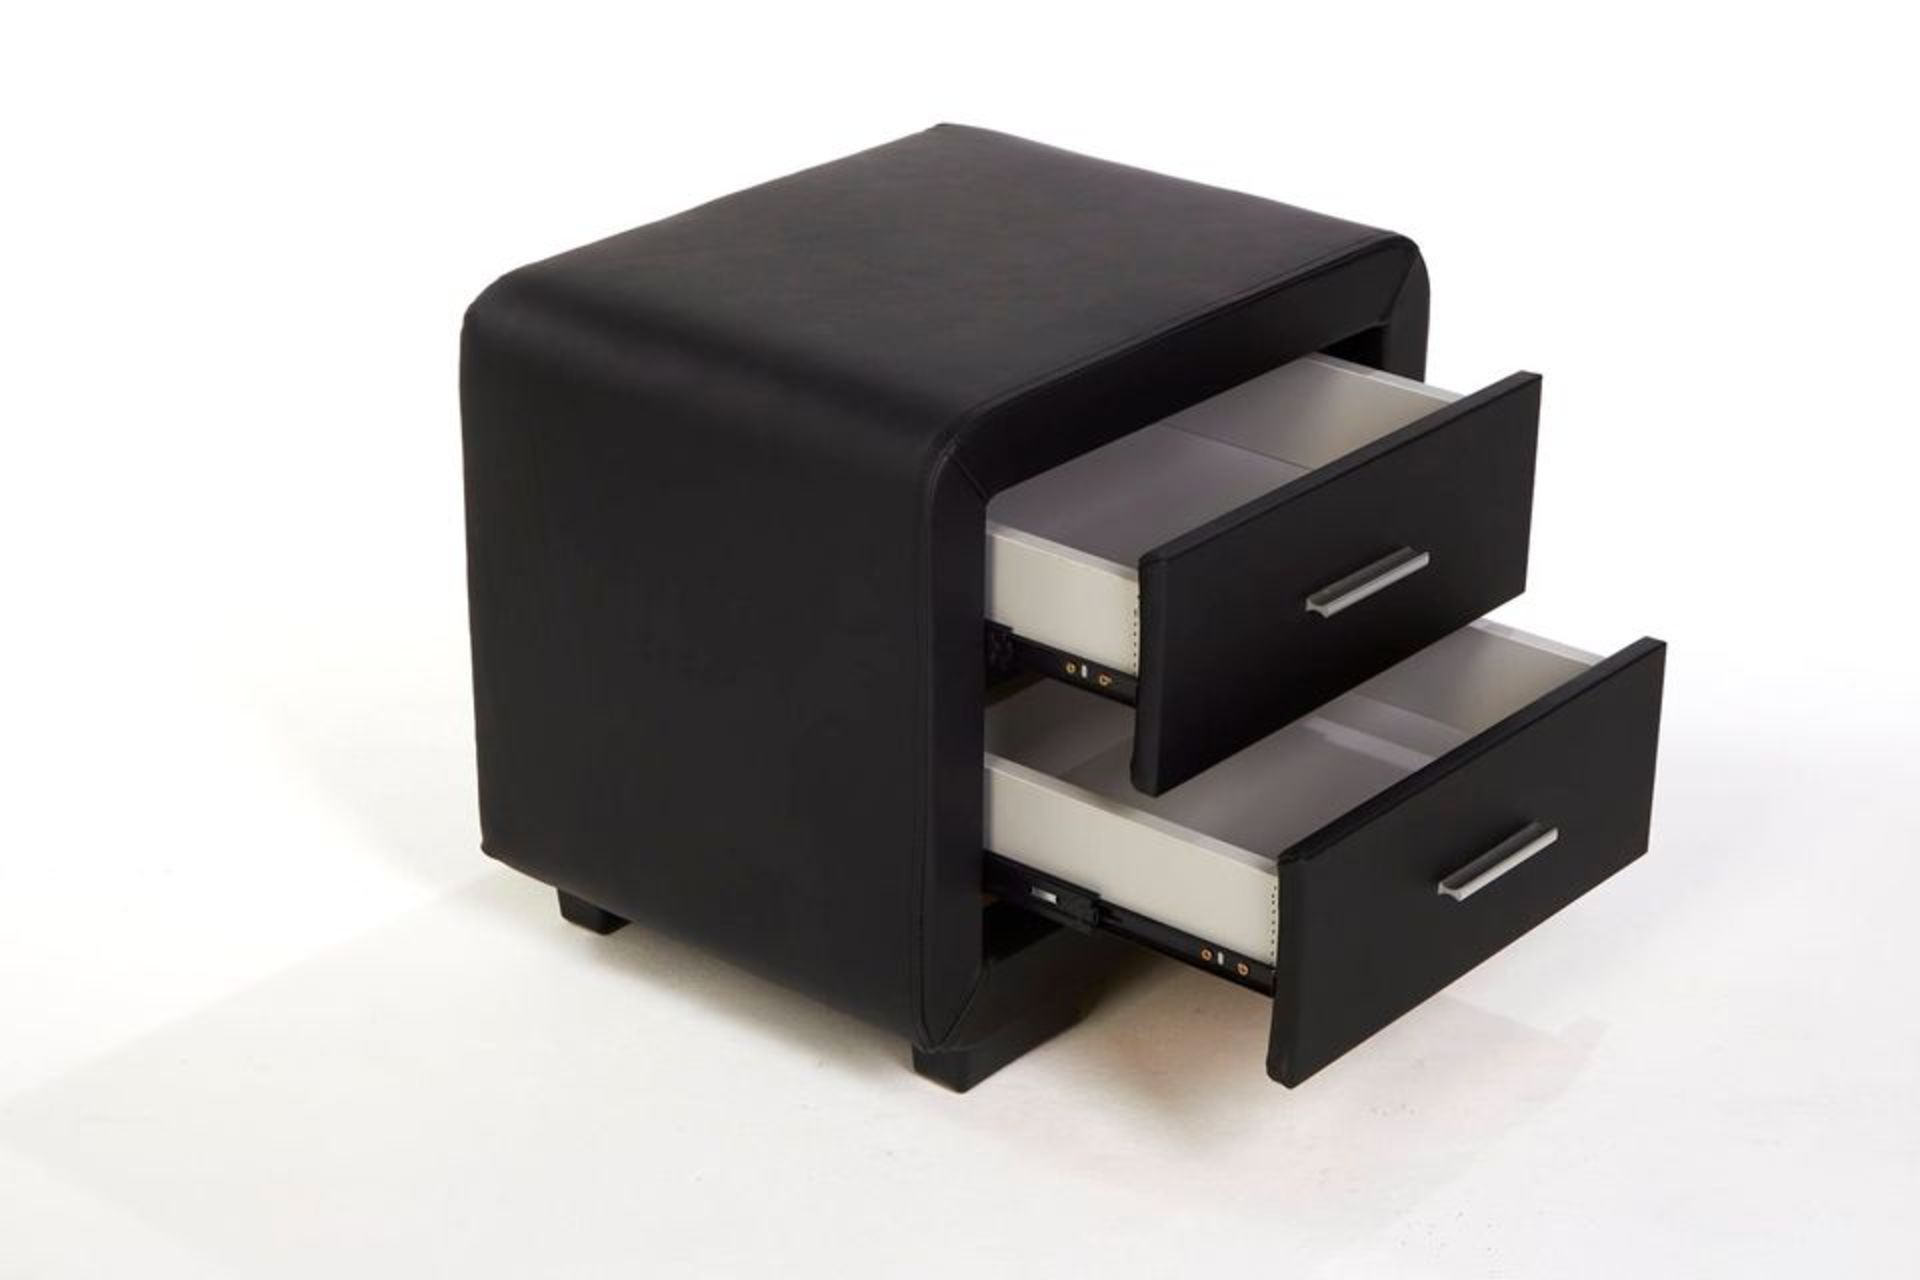 DESIGNER BEDSIDE TABLE CABINET NIGHT STAND FAUX LEATHER - BLACK - Image 3 of 6